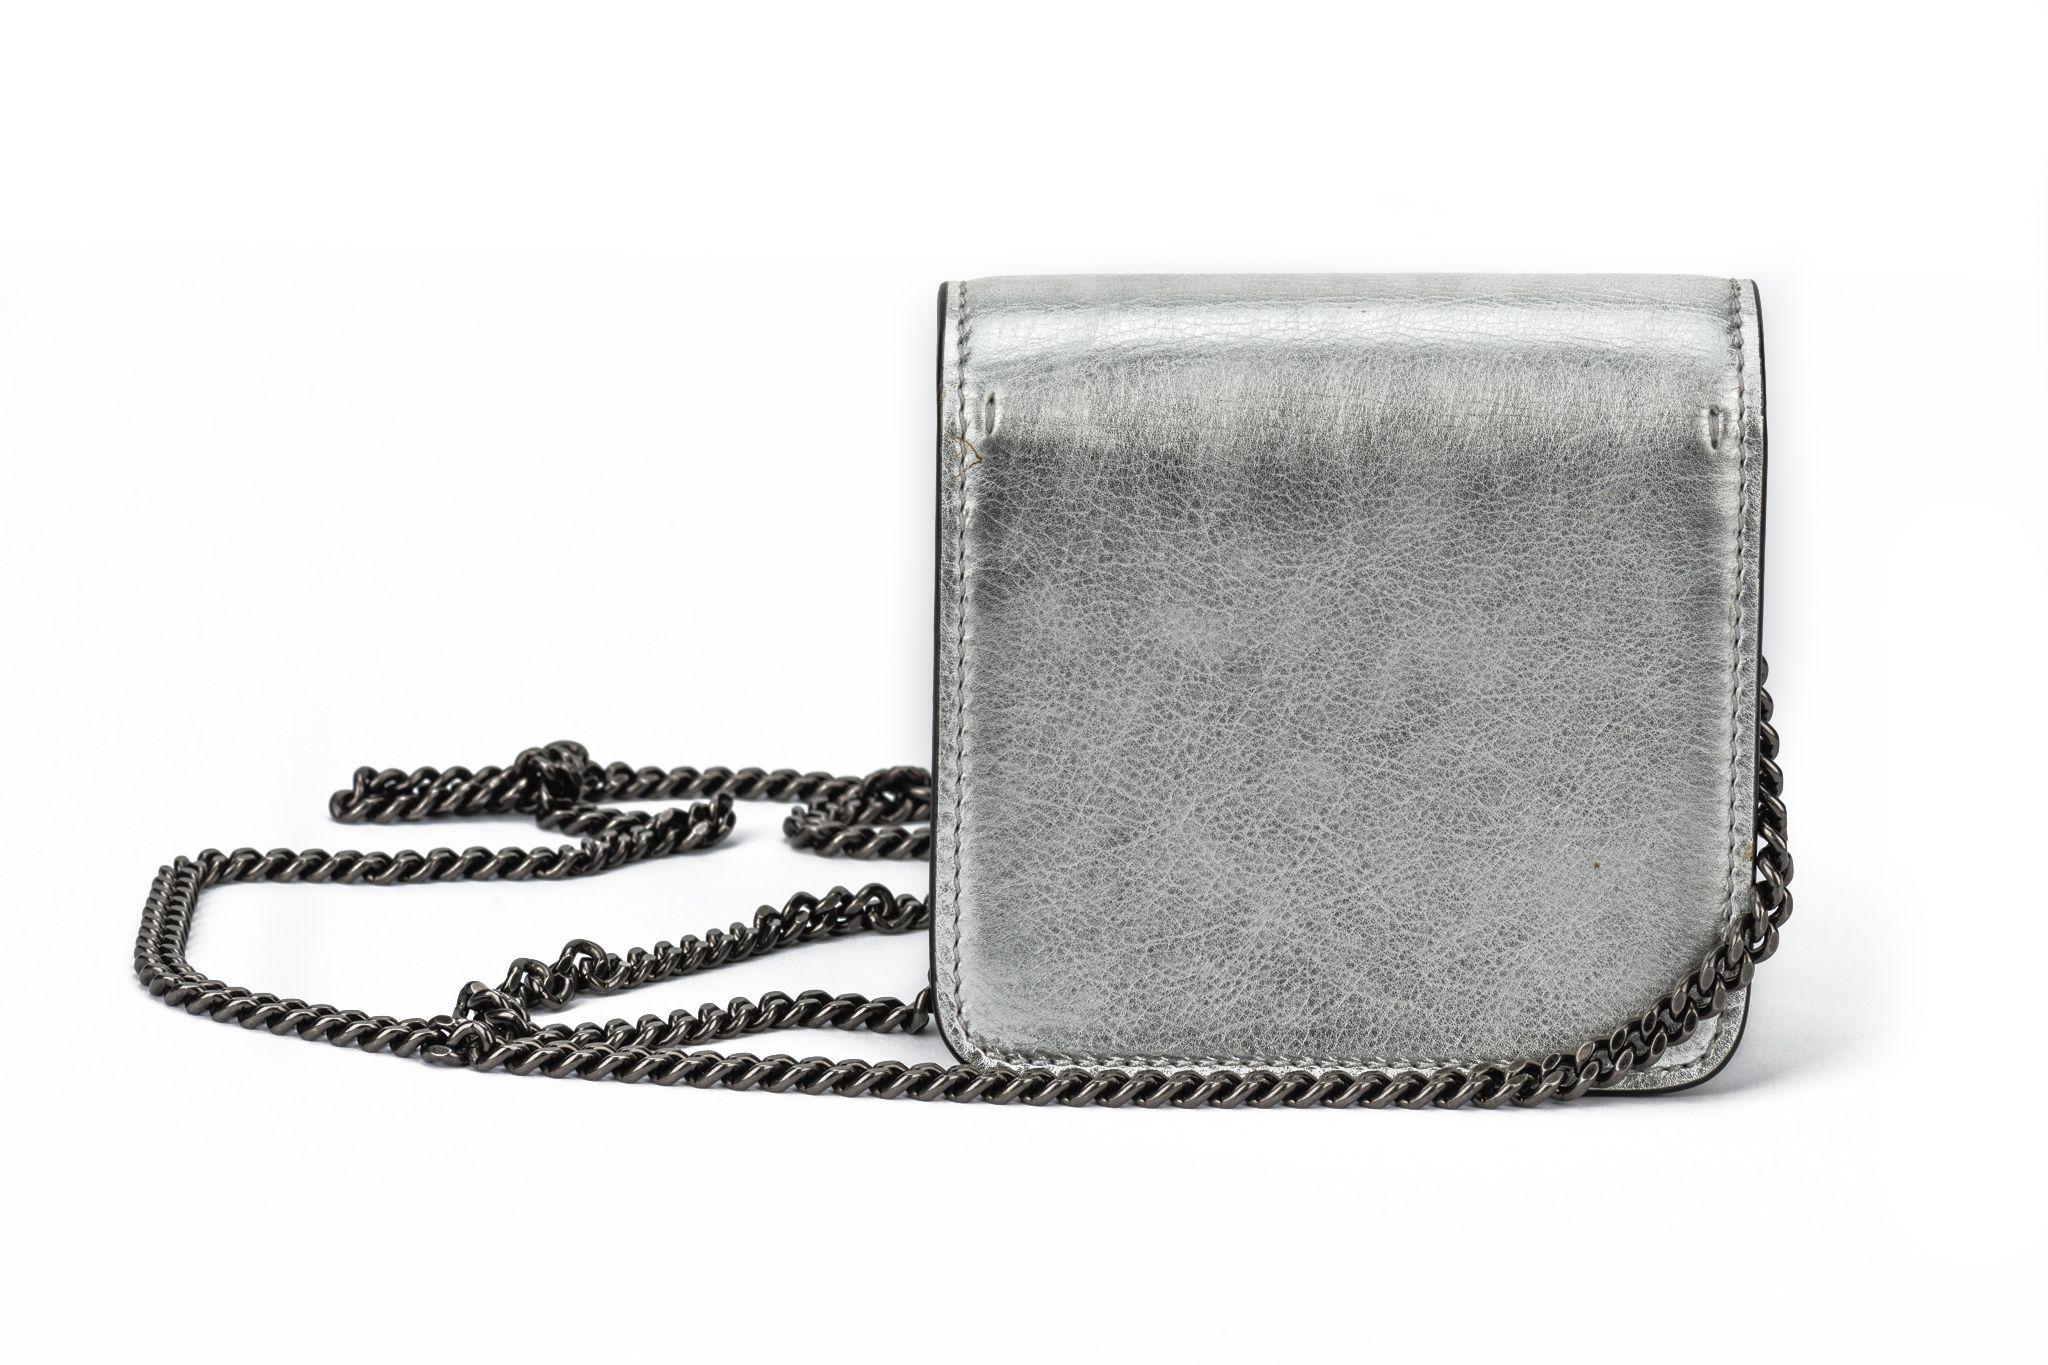 Valentino Silver Mini Cross Body Bag In Excellent Condition For Sale In West Hollywood, CA